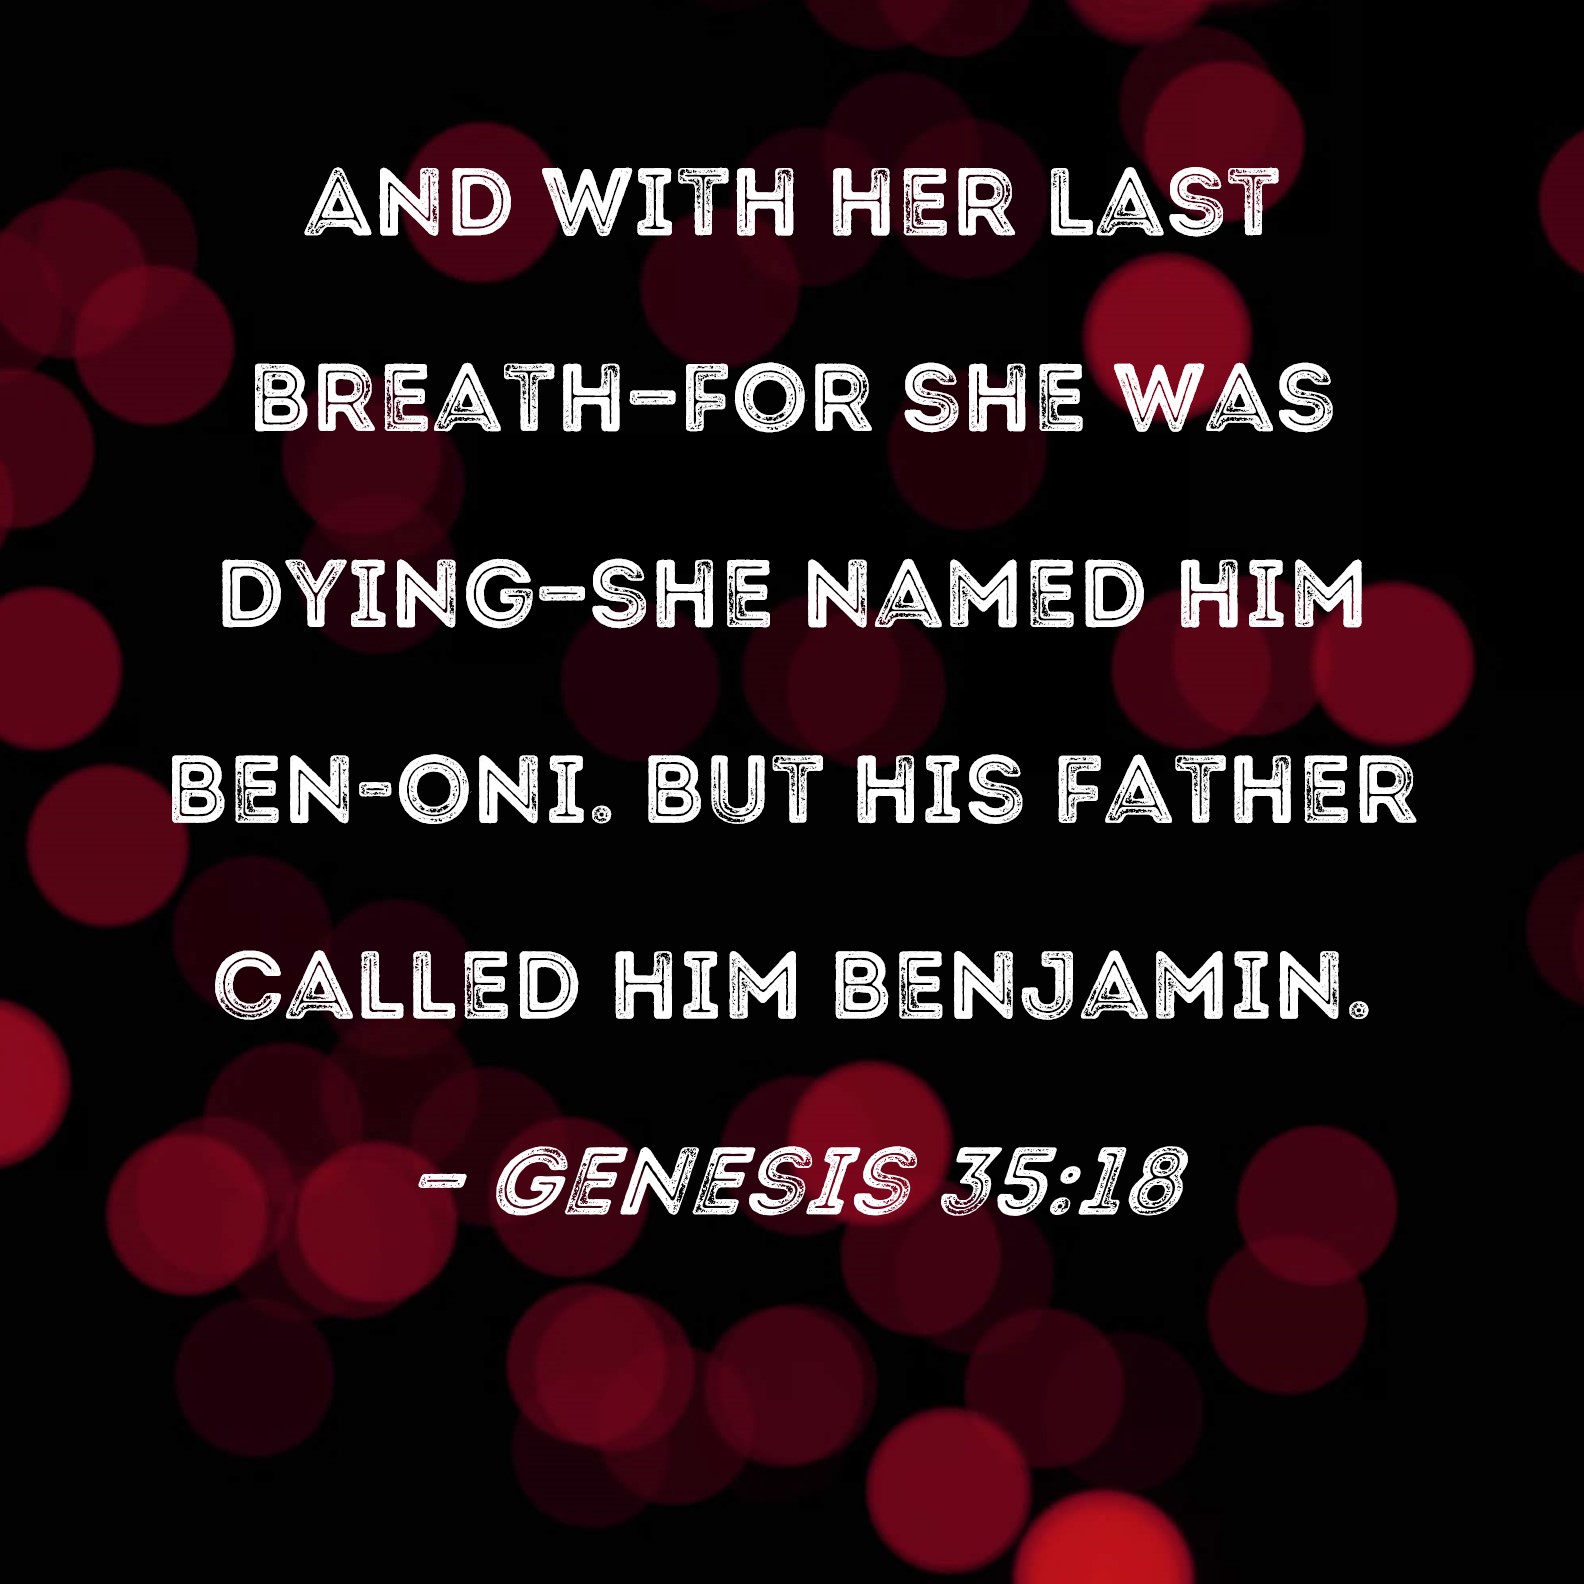 Genesis 35:18 (kjv) - And it came to pass, as her soul was in depar